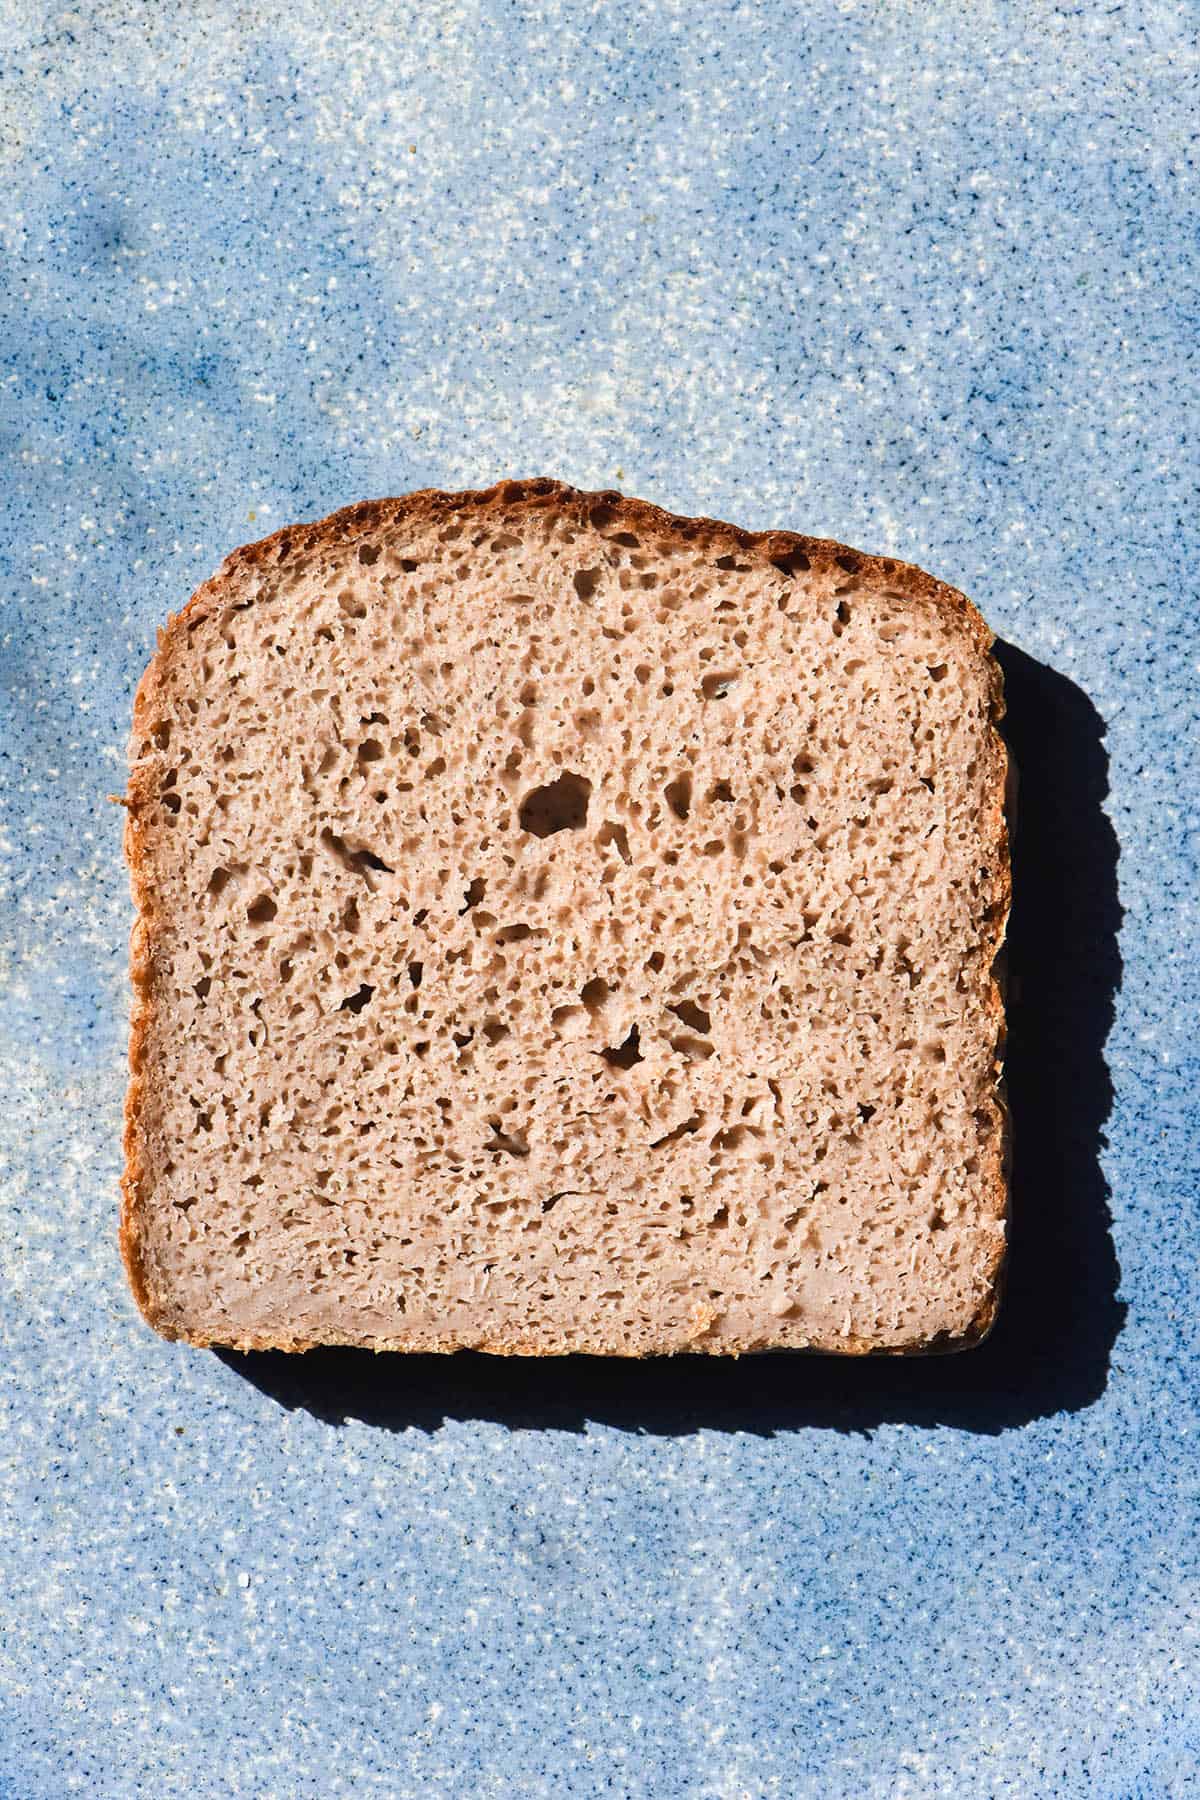 An aerial sunlit image of a slice of gluten free buckwheat bread atop a bright blue ceramic plate